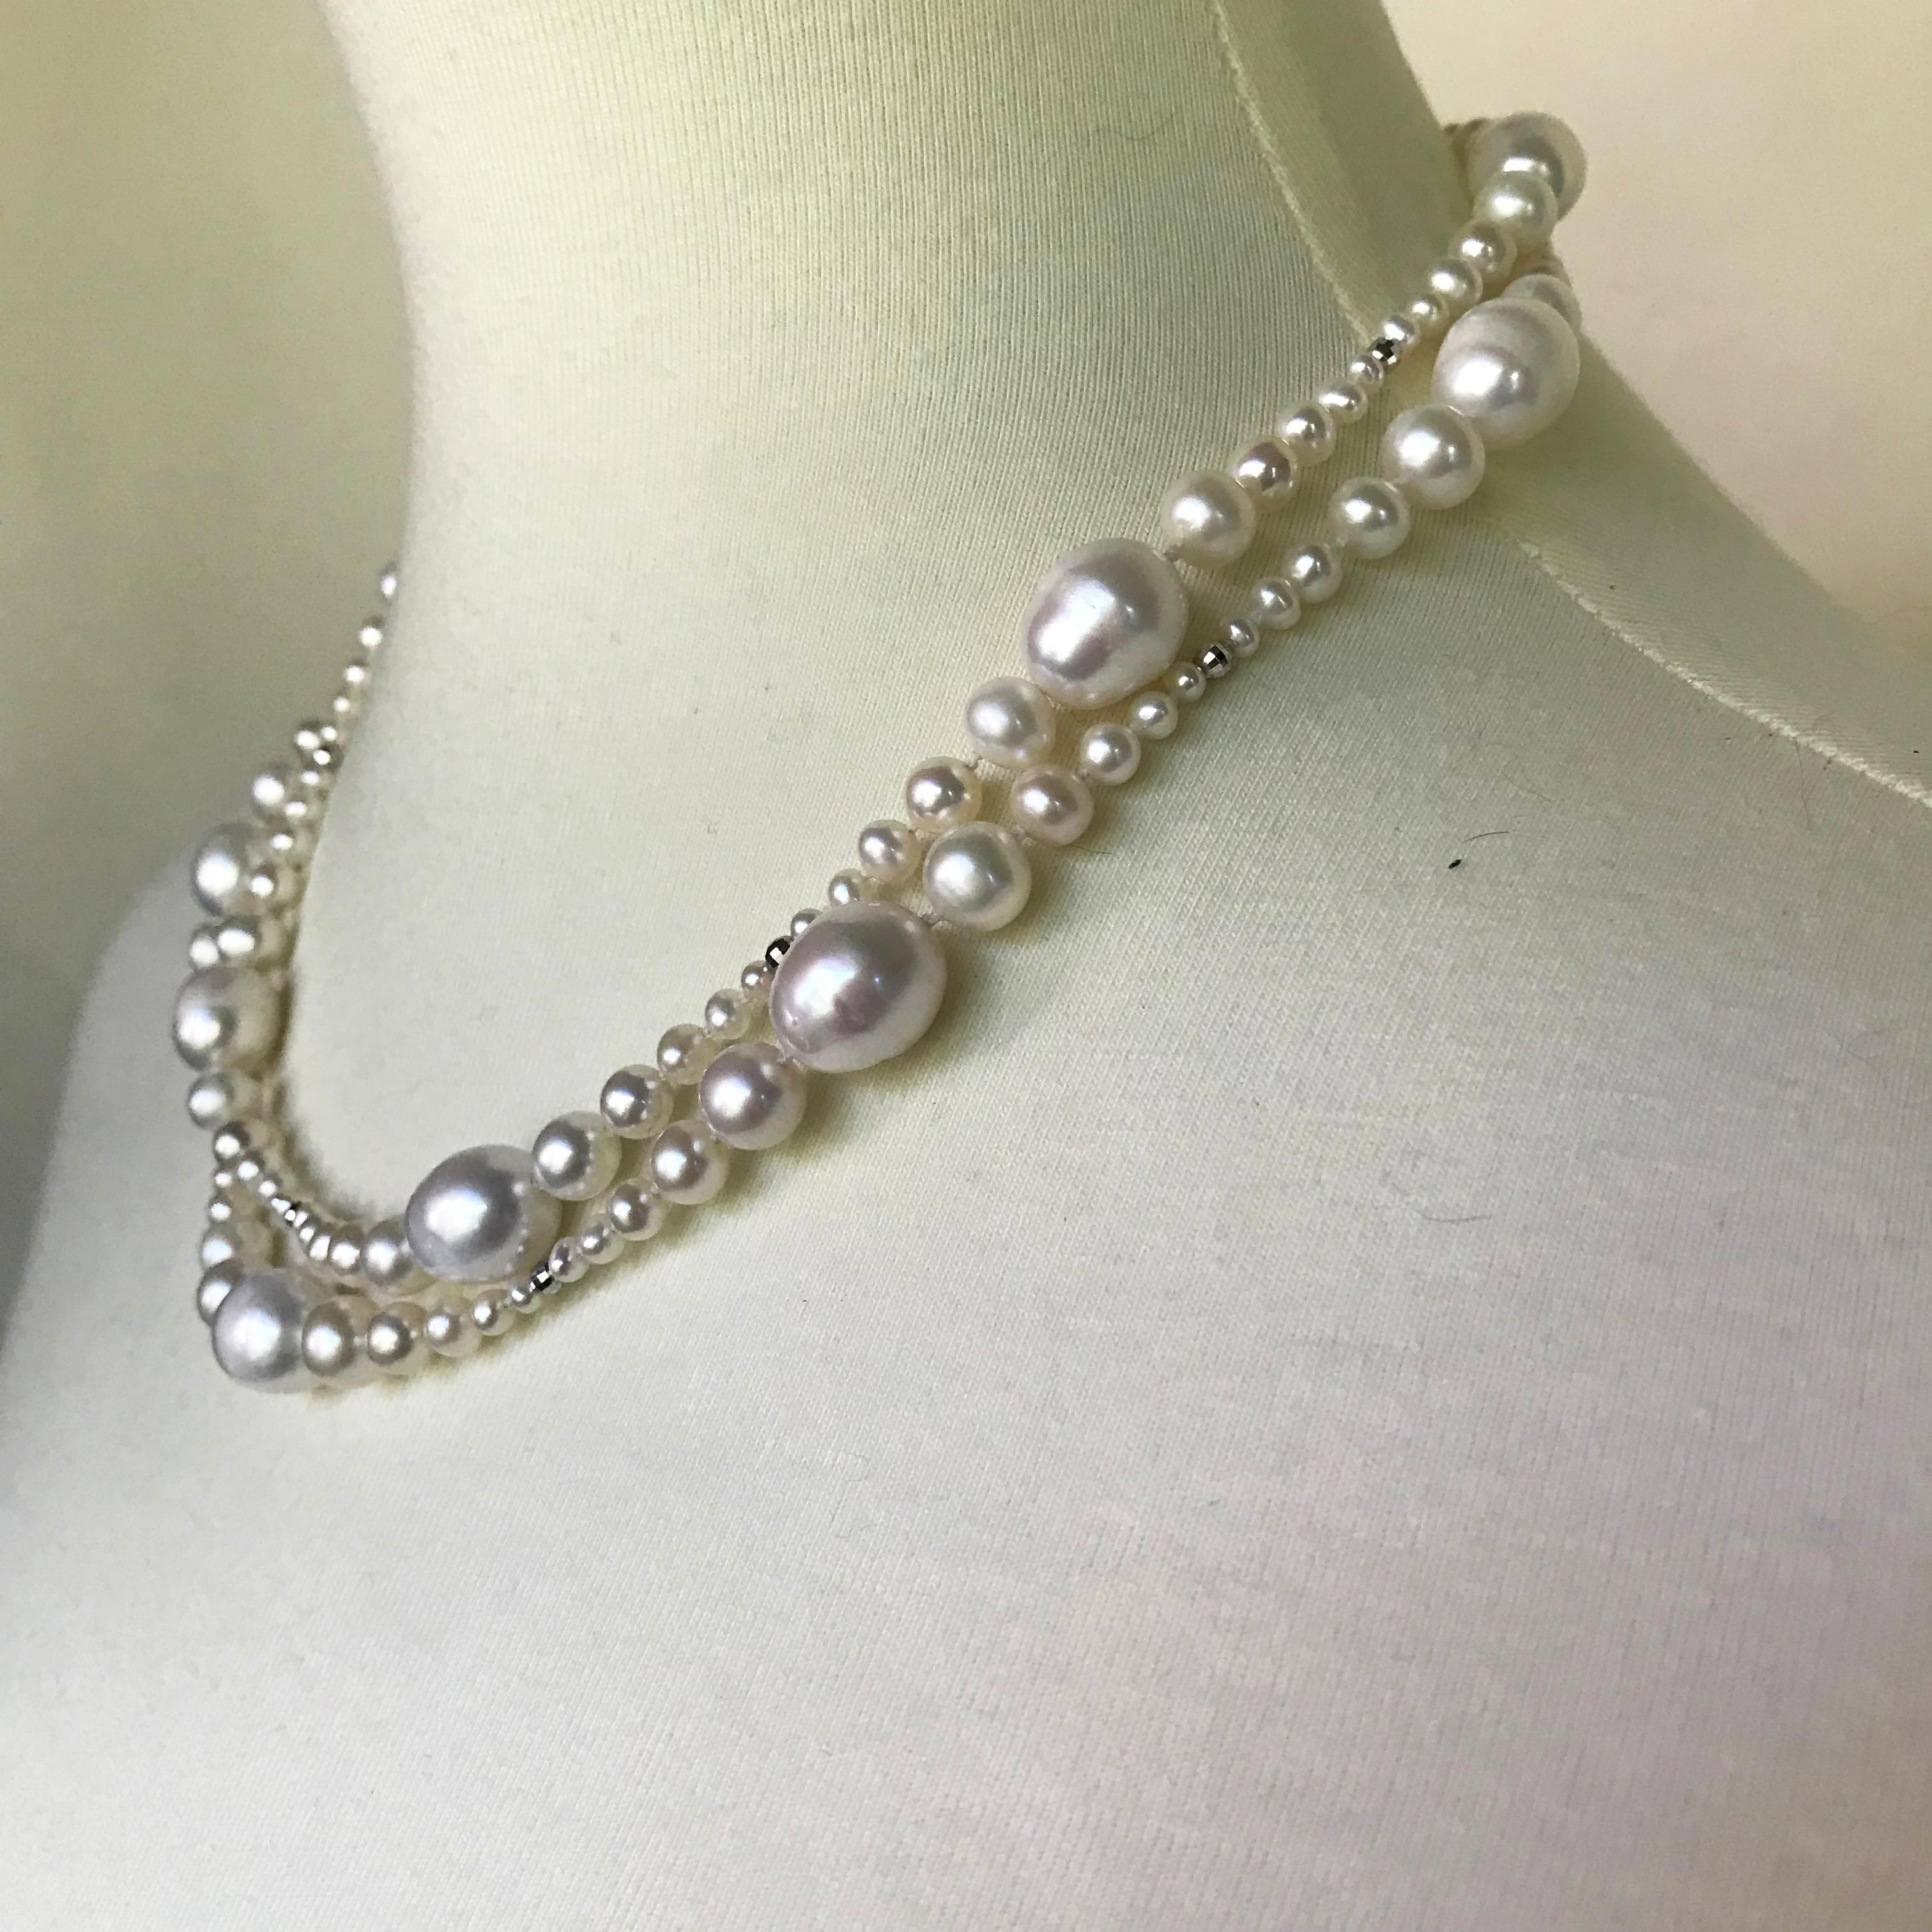 Artist Marina J Multi-Graduated White Pearl Long Necklace with White Gold Clasp & Beads